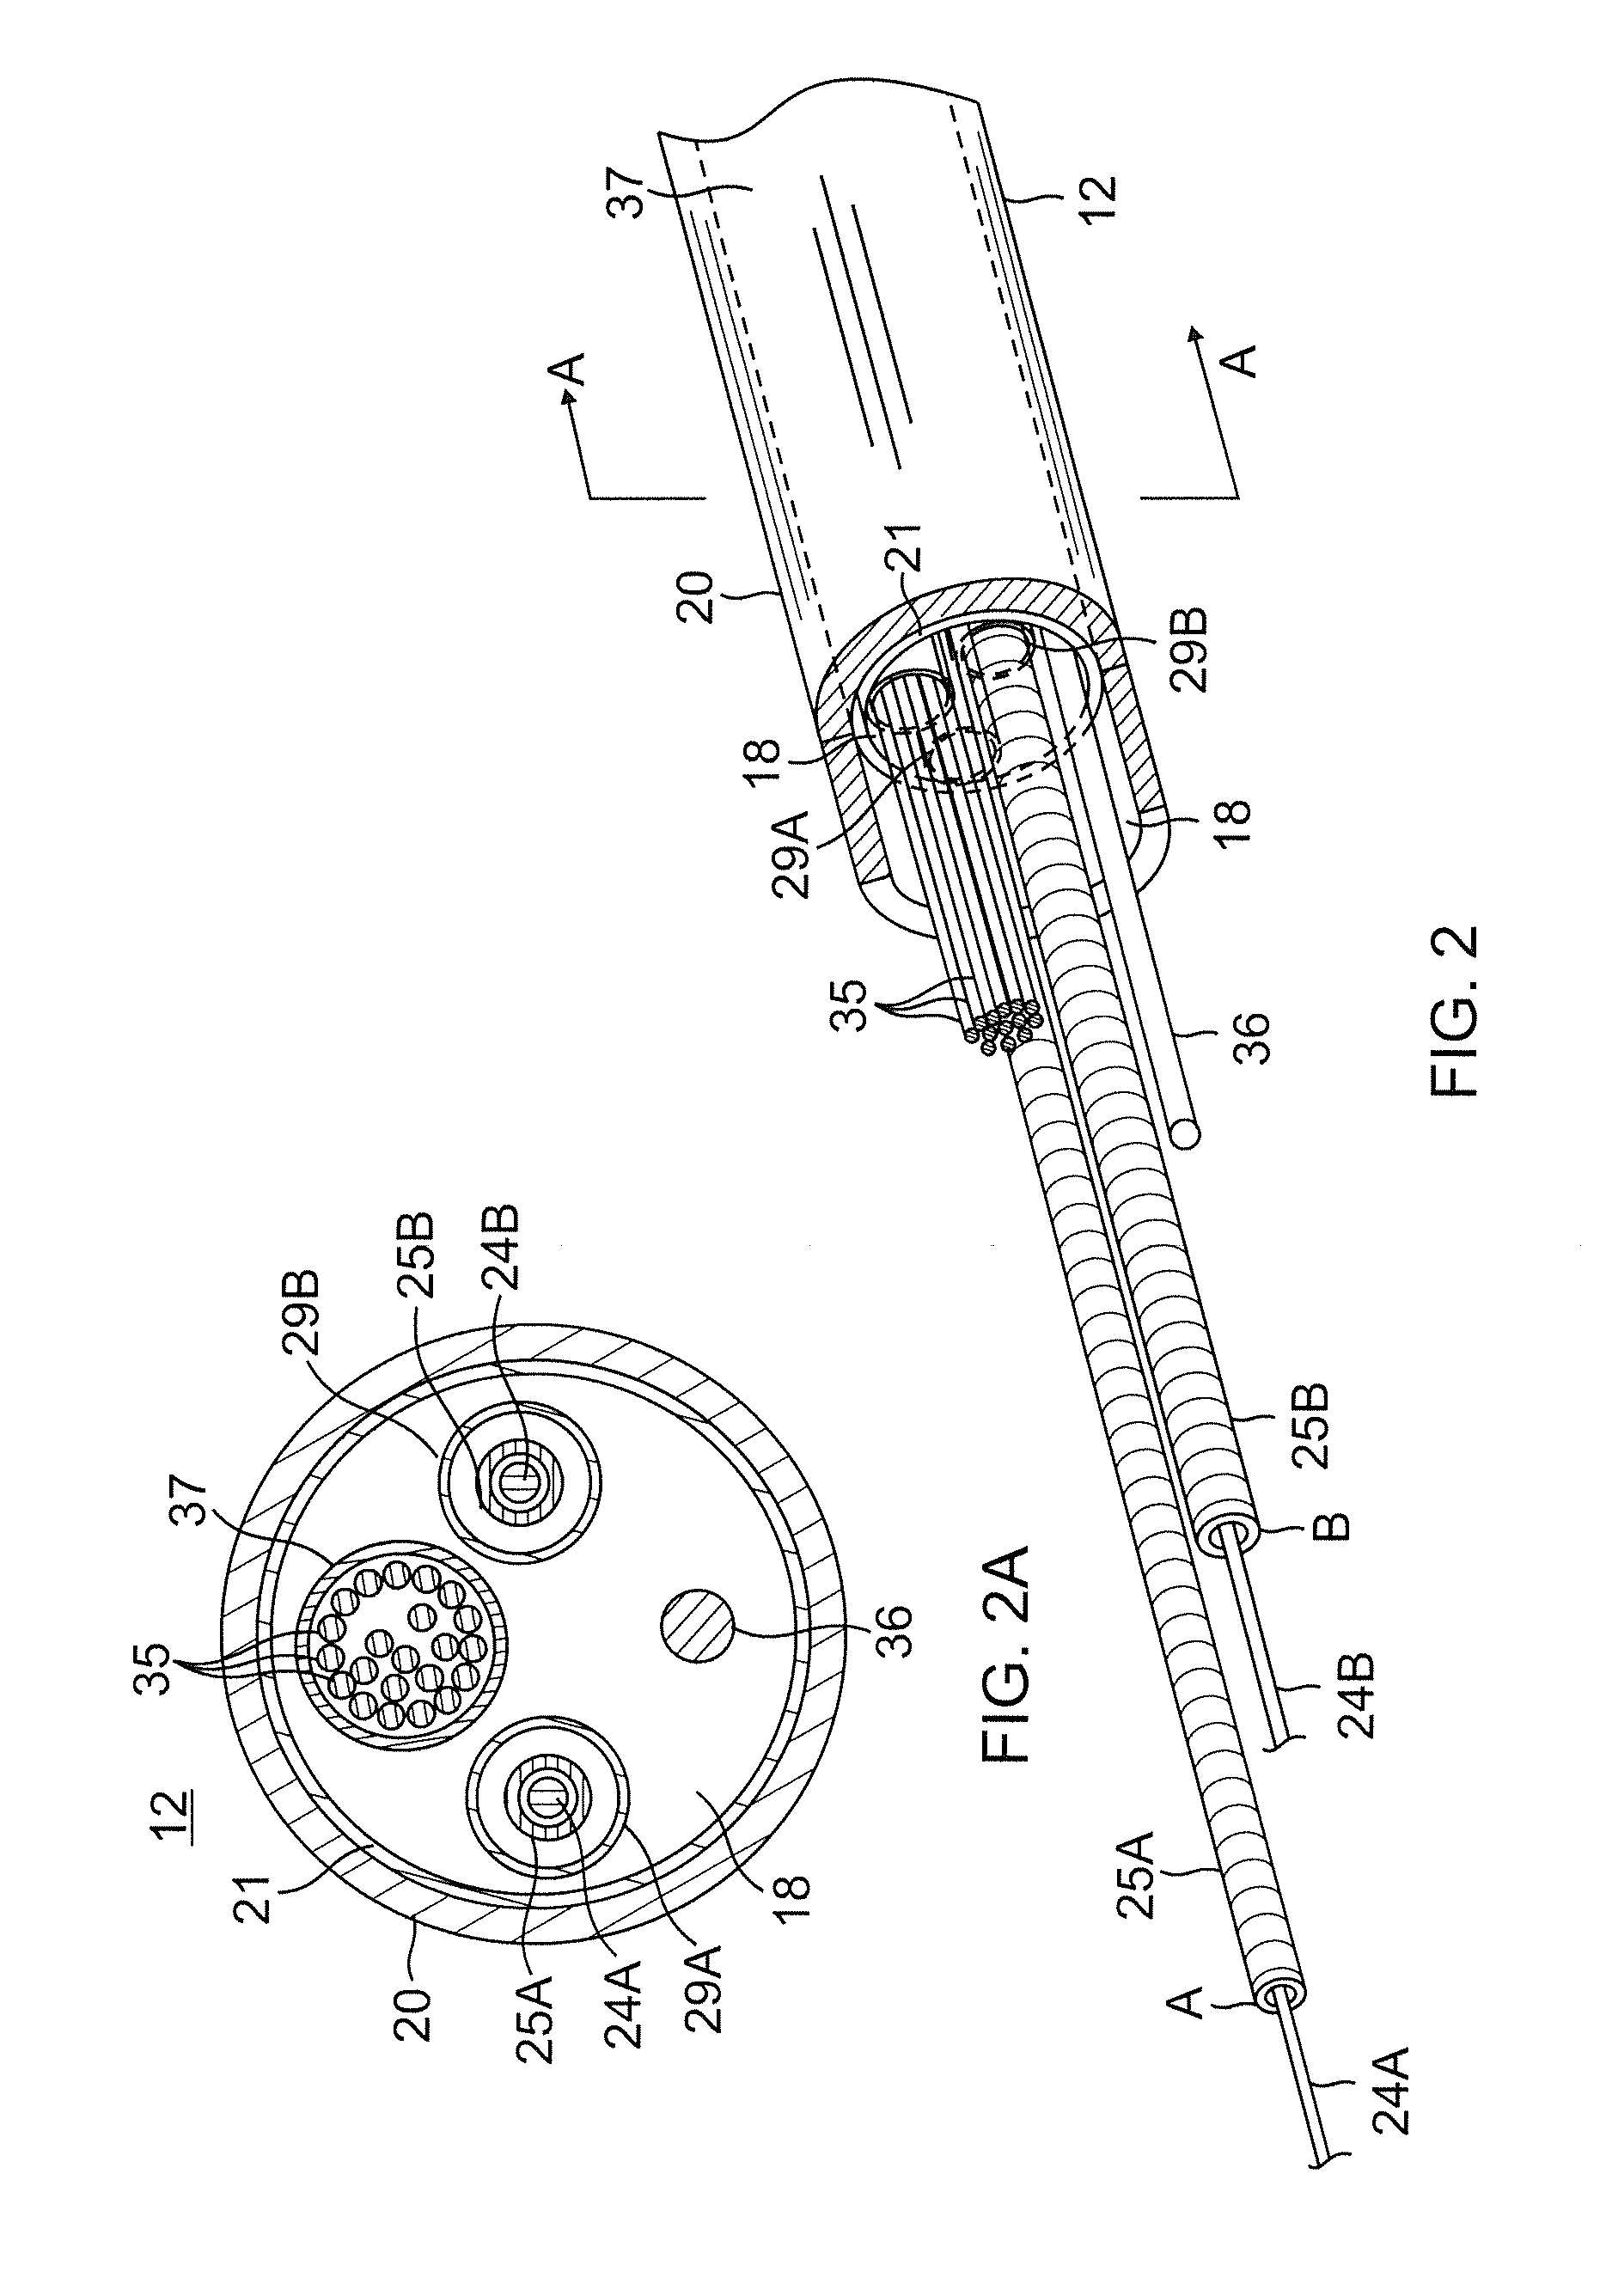 Double loop lasso with single puller wire for bi-directional actuation